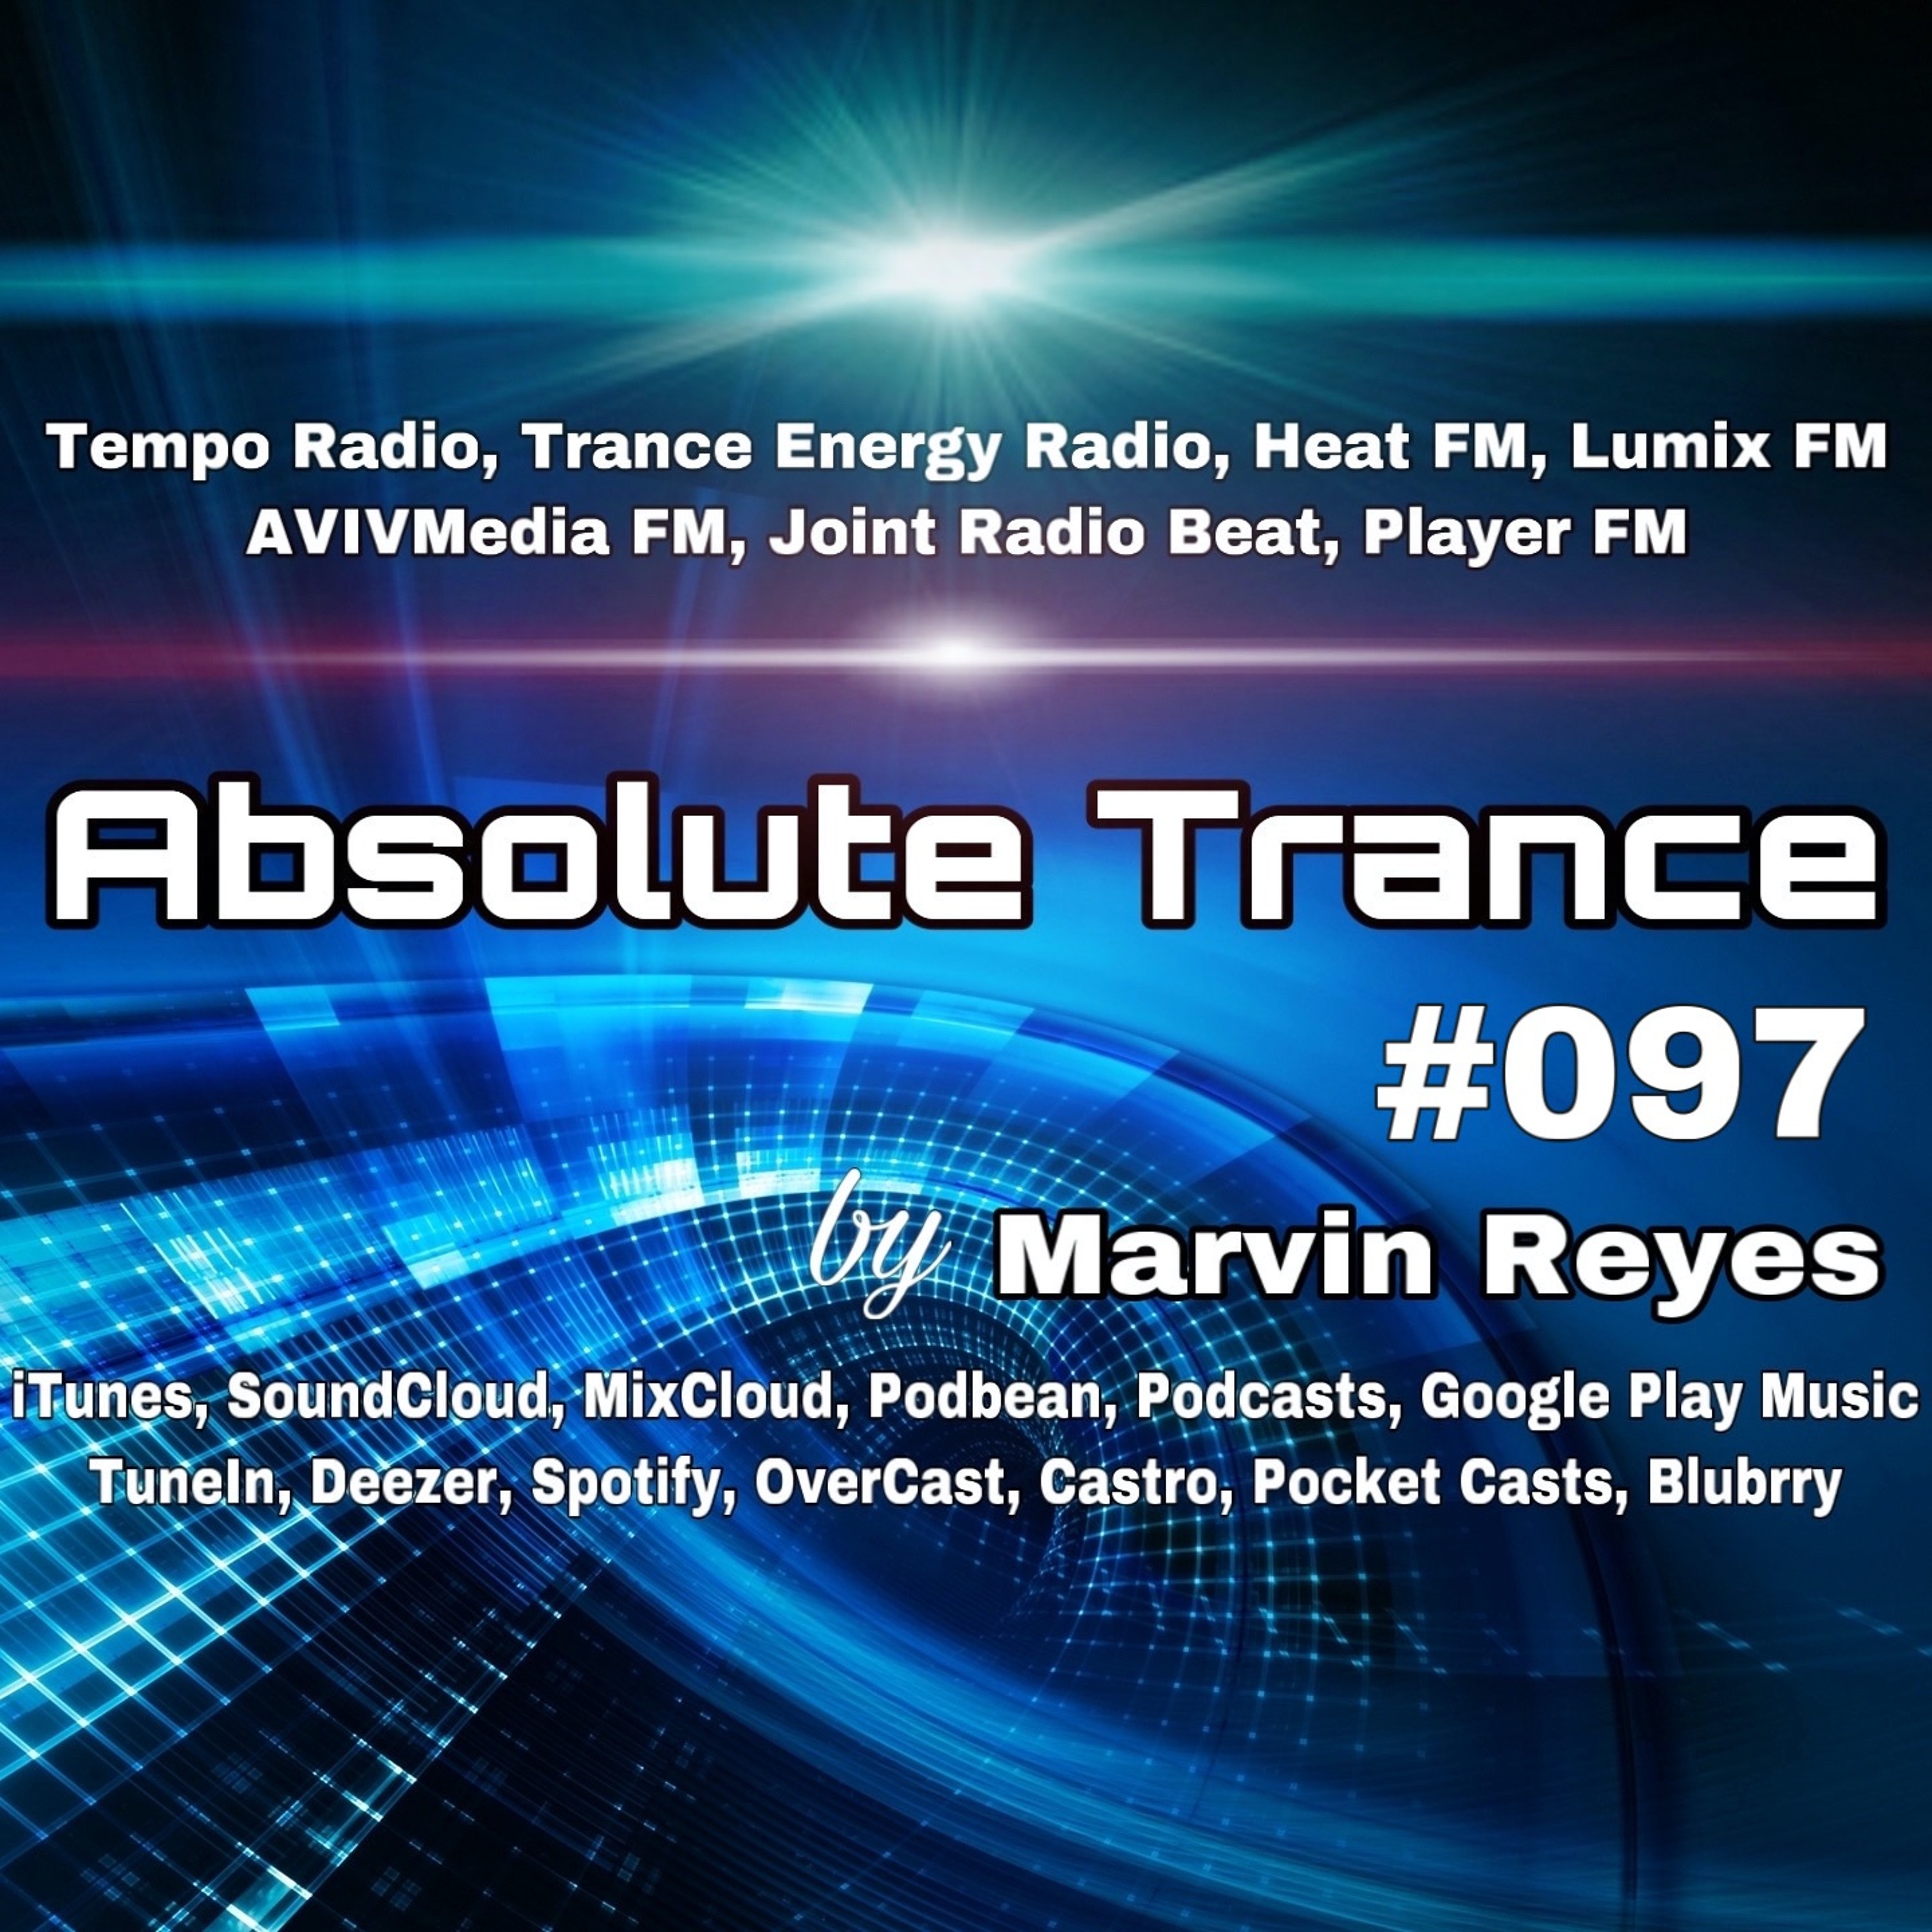 Absolute Trance #097